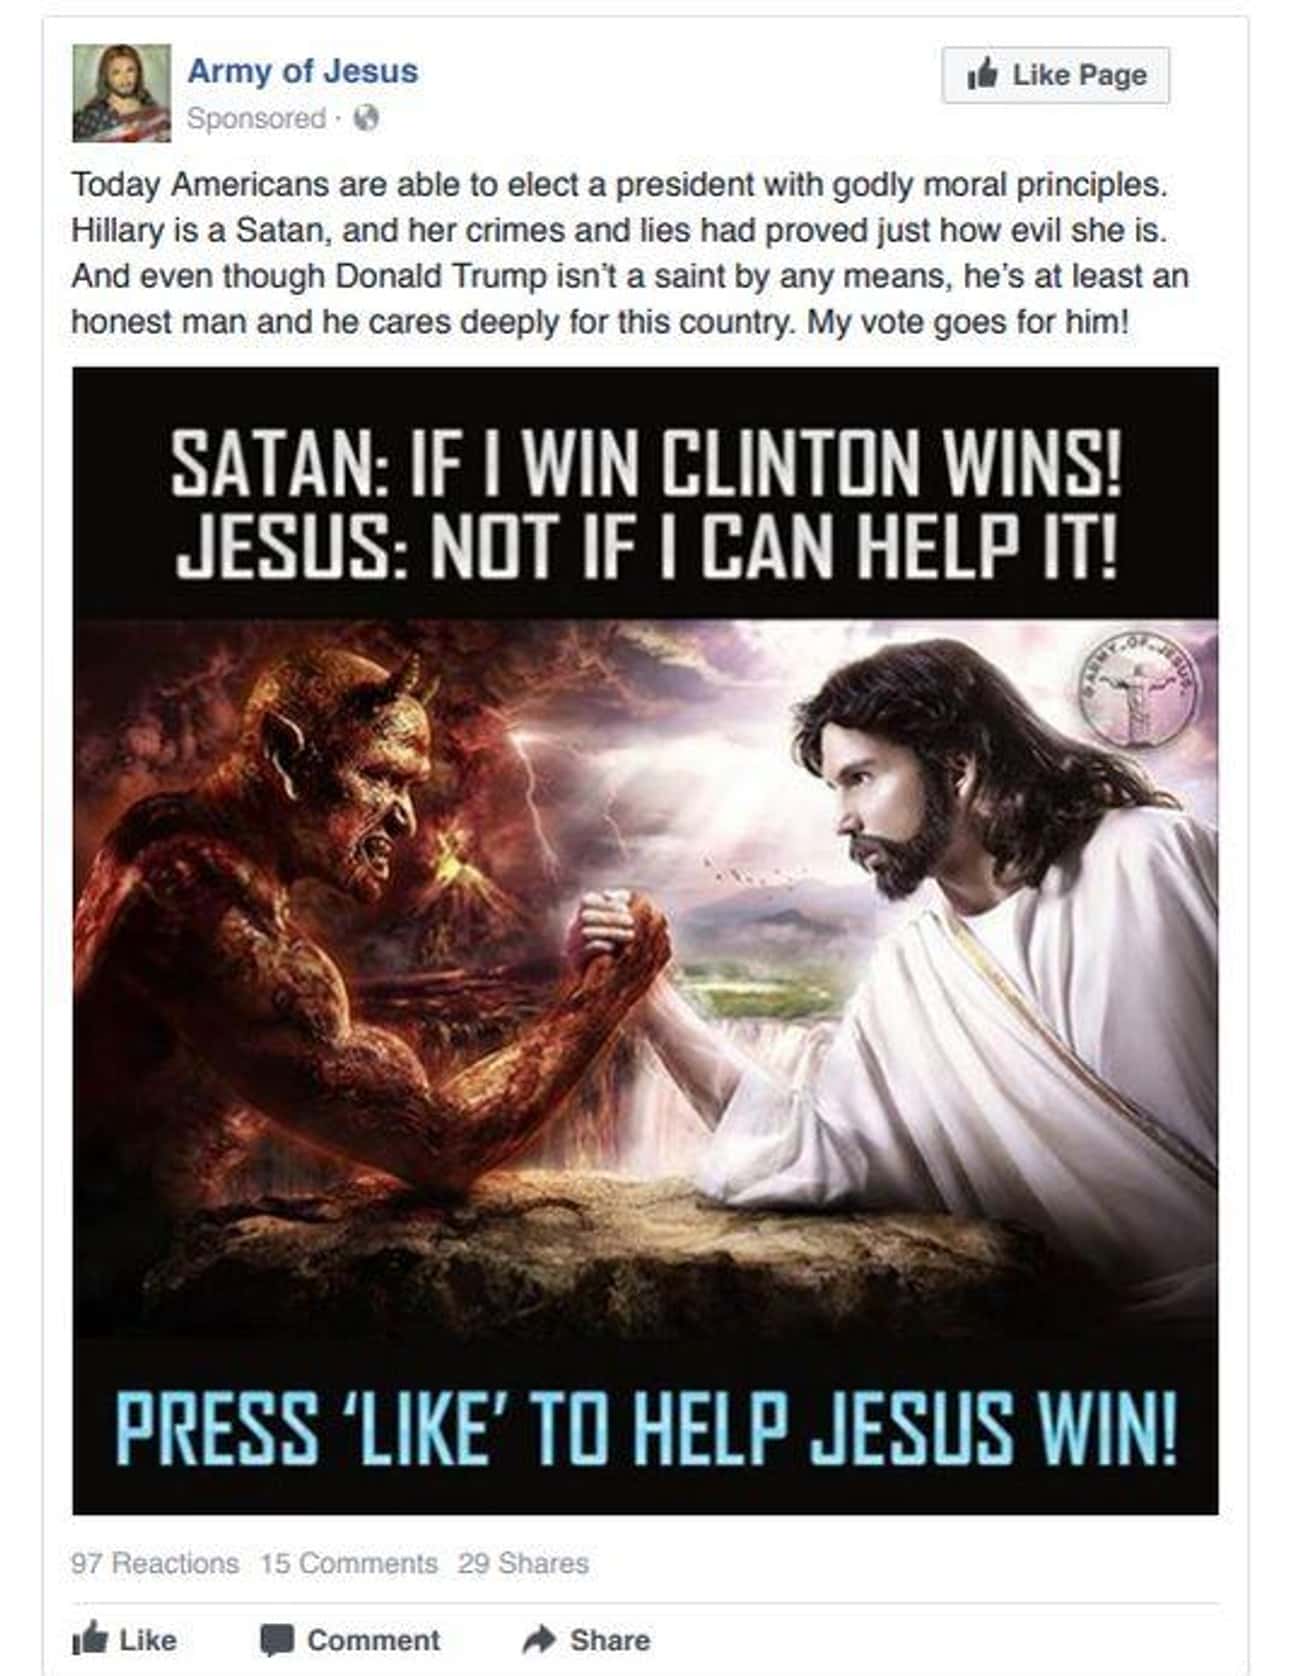 Help Jesus Defeat The Devil (And Hillary)